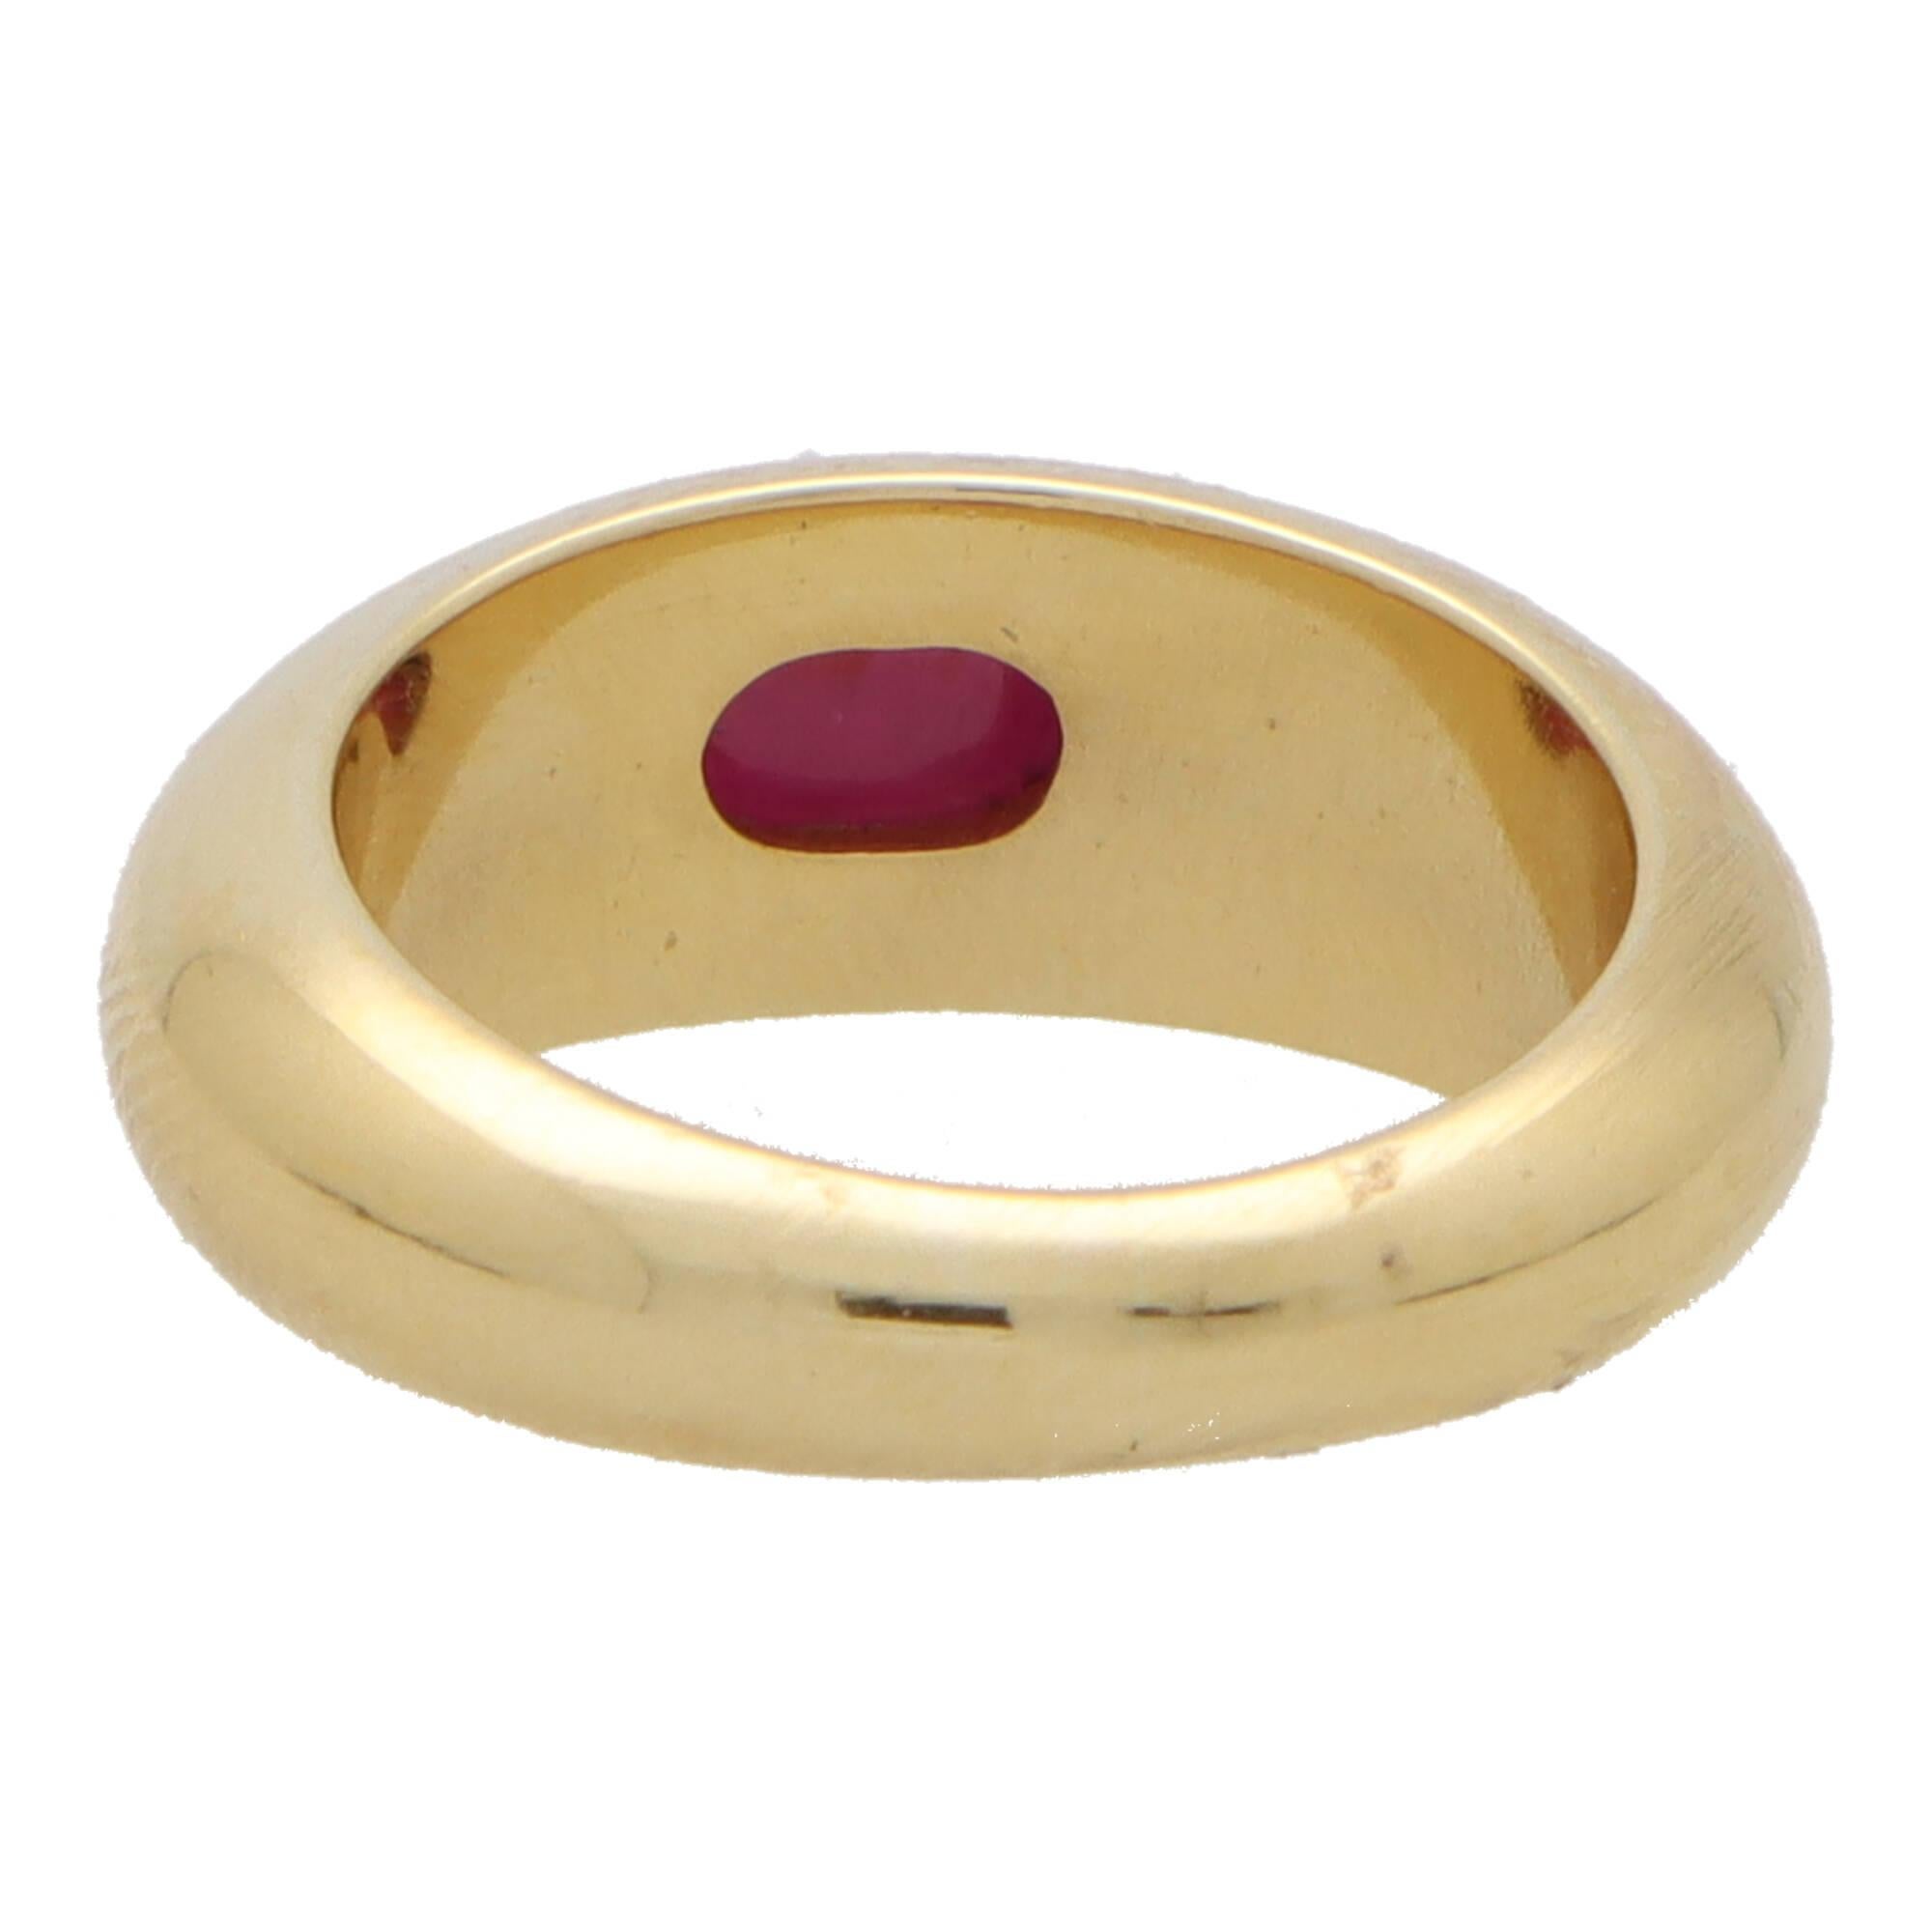  Vintage Cabochon Ruby Gypsy Set Chunky Ring in 18k Yellow Gold For Sale 1